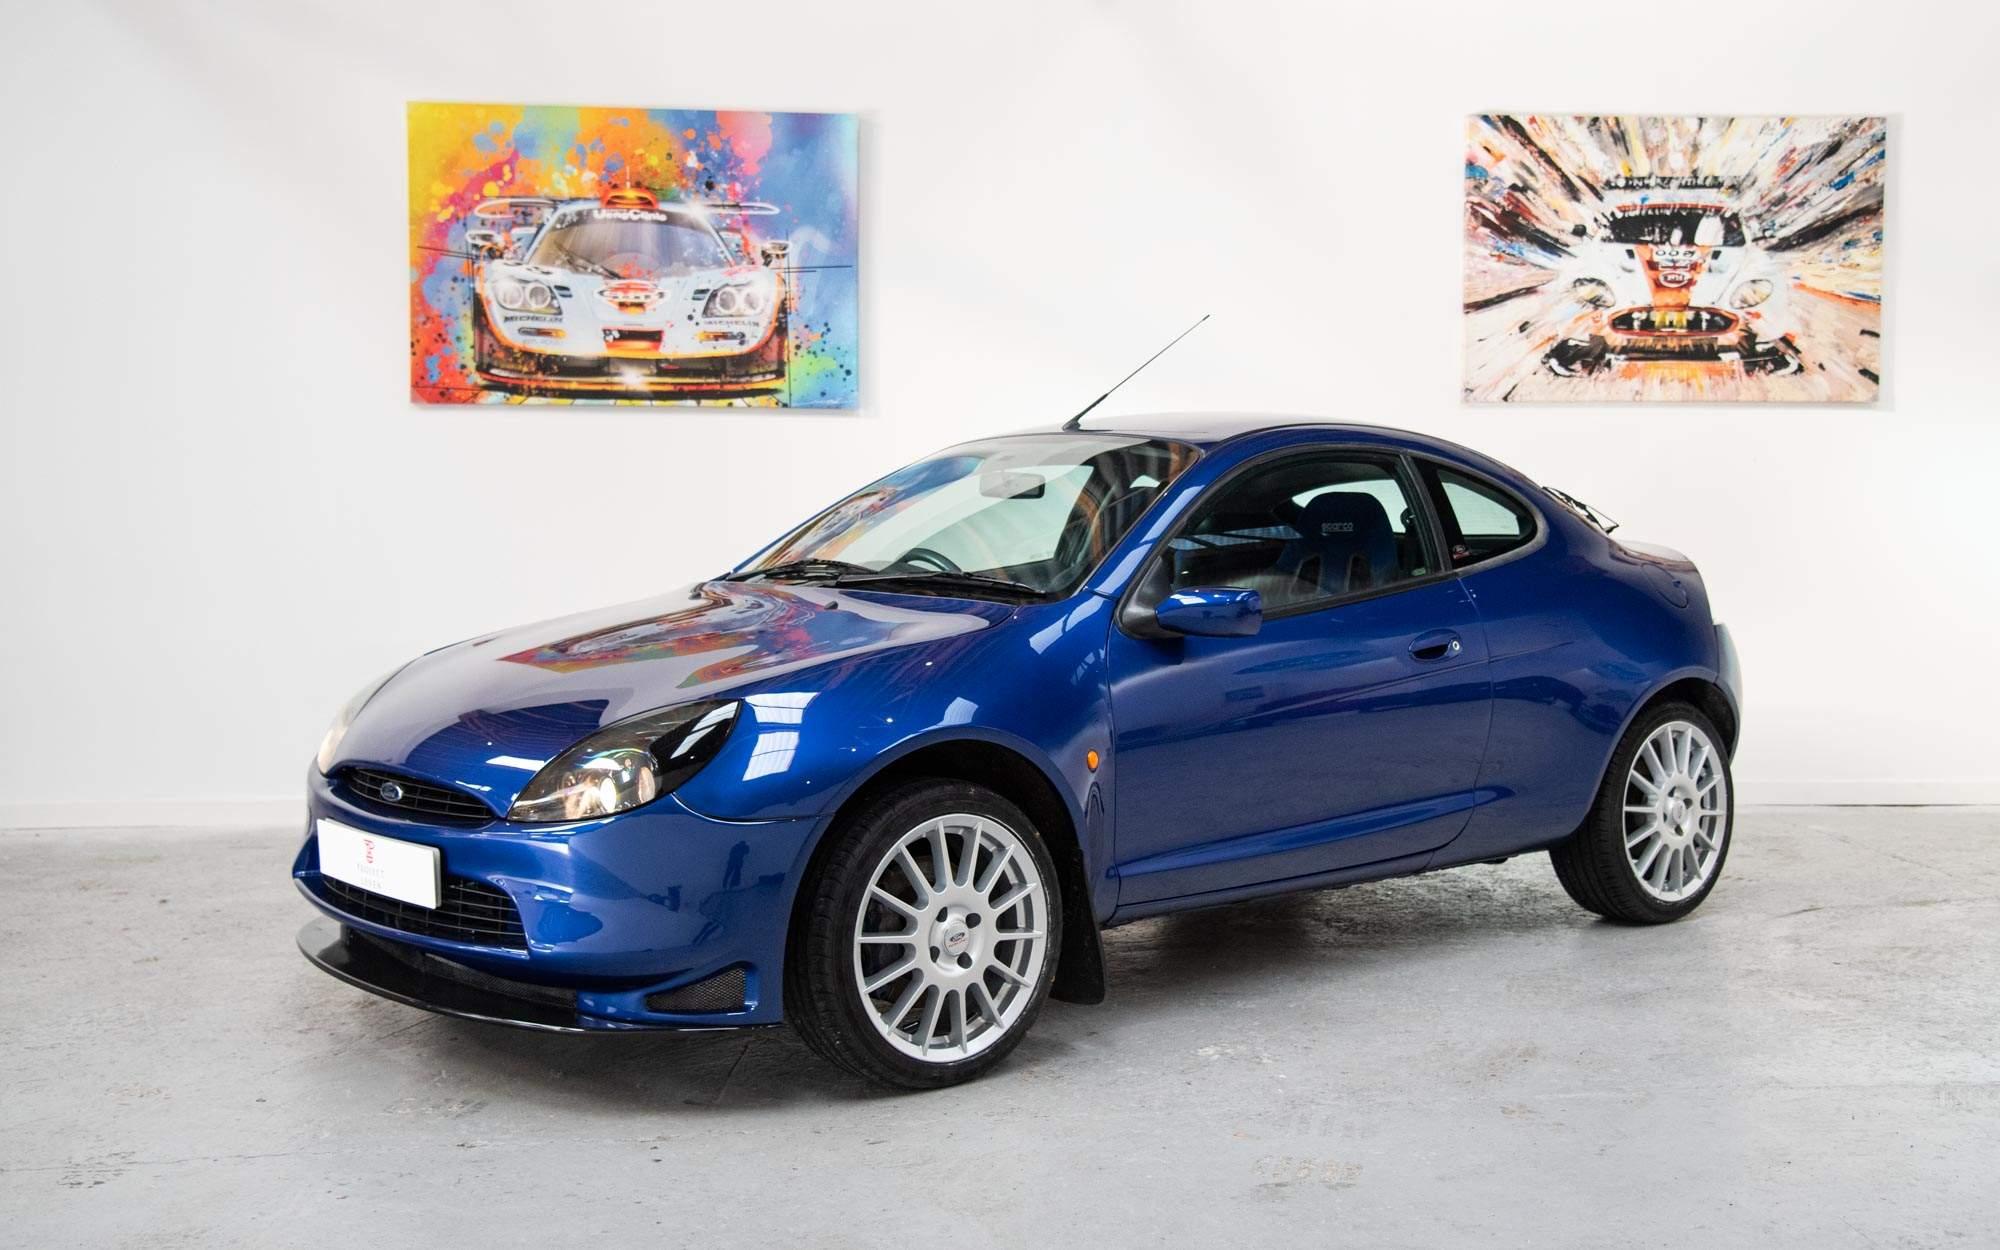 Used Ford Puma Racing Cars For Sale | AutoTrader UK